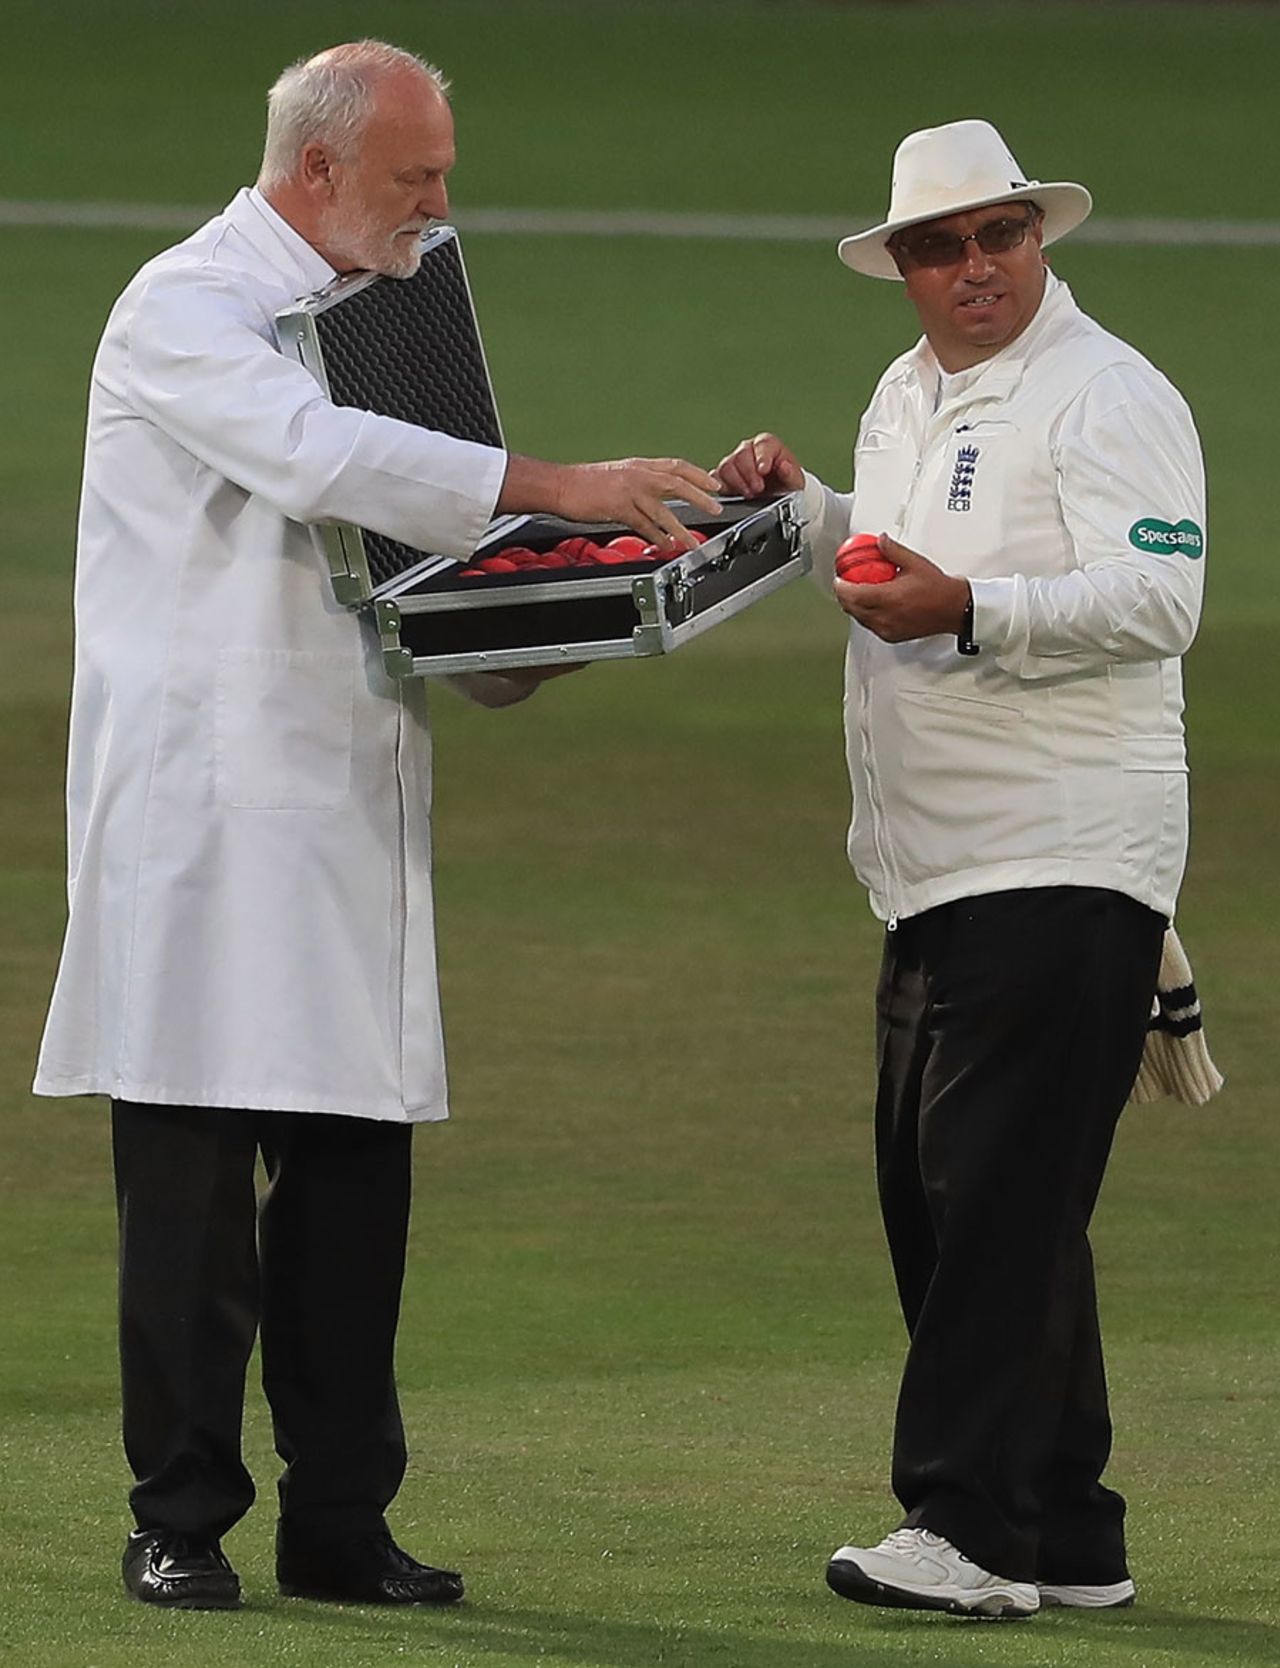 Umpire Neil Bainton selects a new pink ball from the box of replacements, Nottinghamshire v Kent, Specsavers County Championship Division One, Trent Bridge, 1st day, June 26, 2017